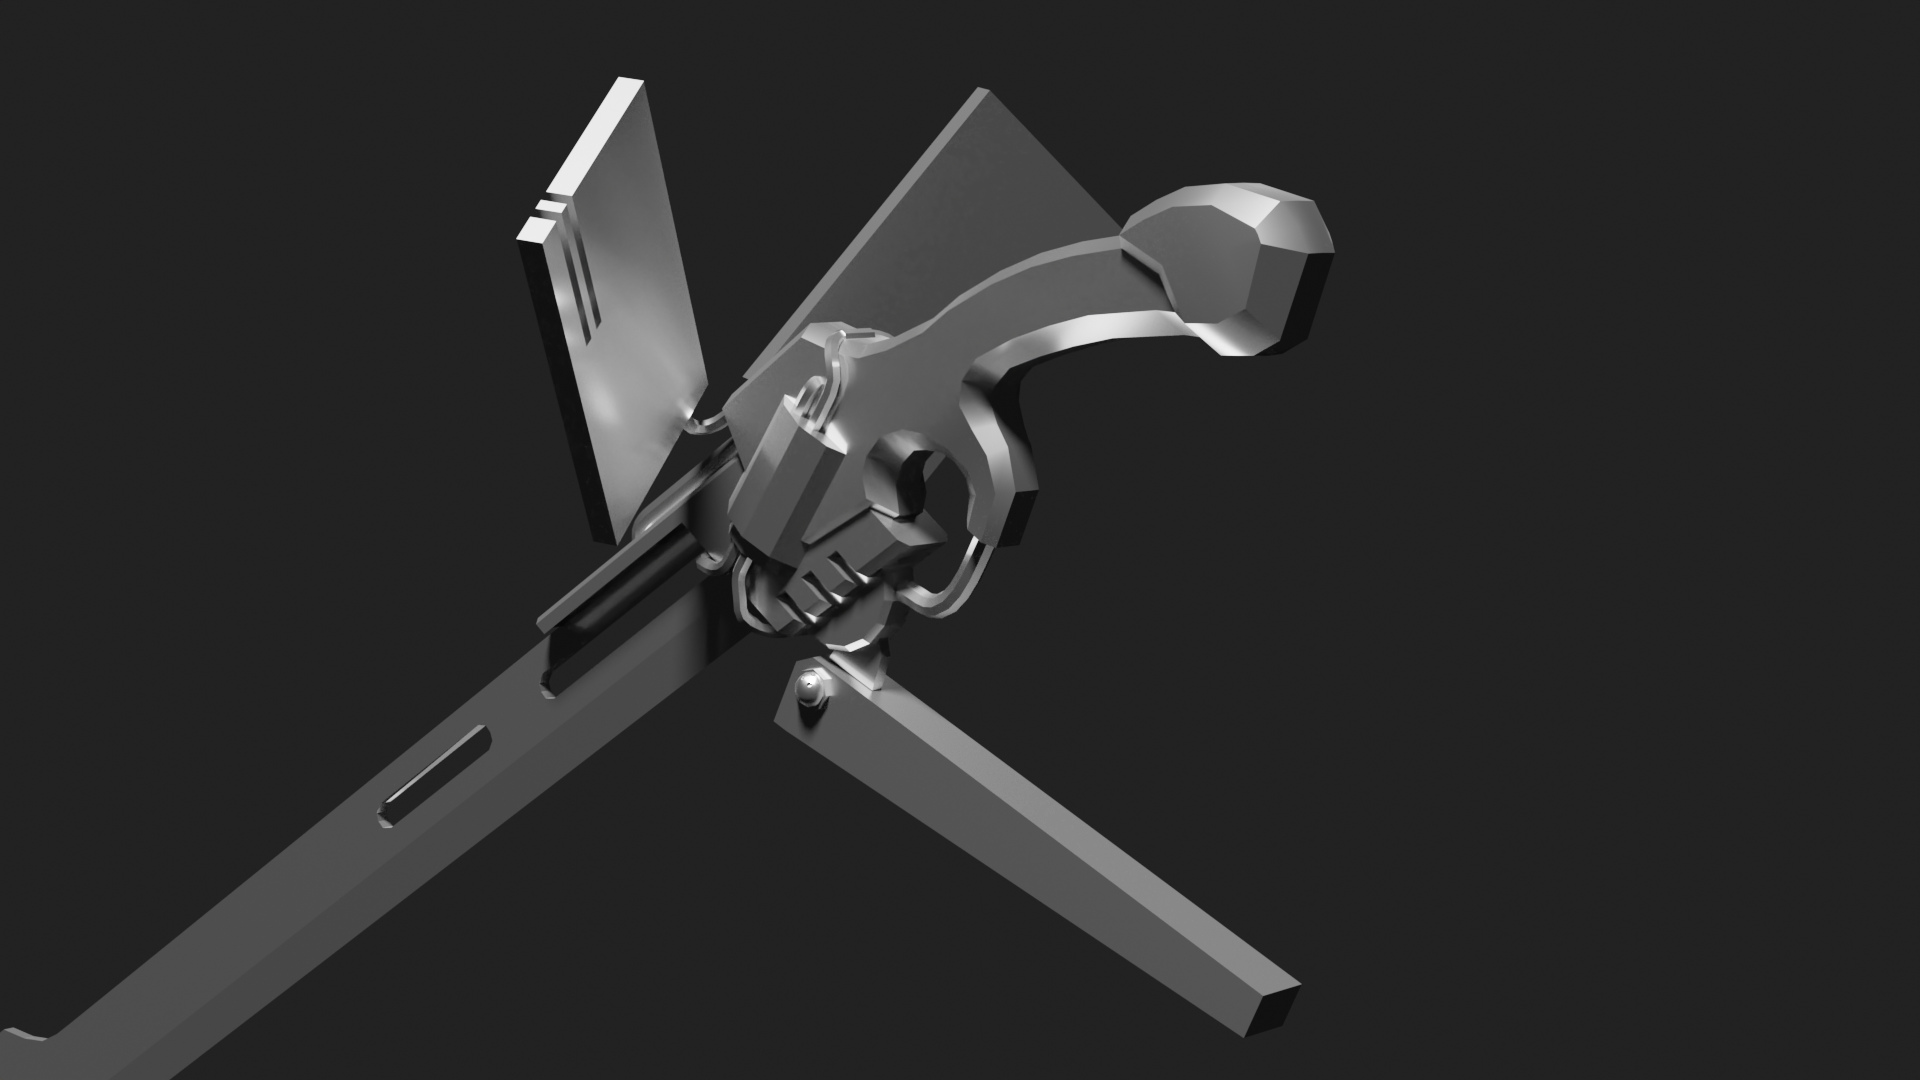 A Blender Cycles render of the sword hilt, showing the mechanical details.